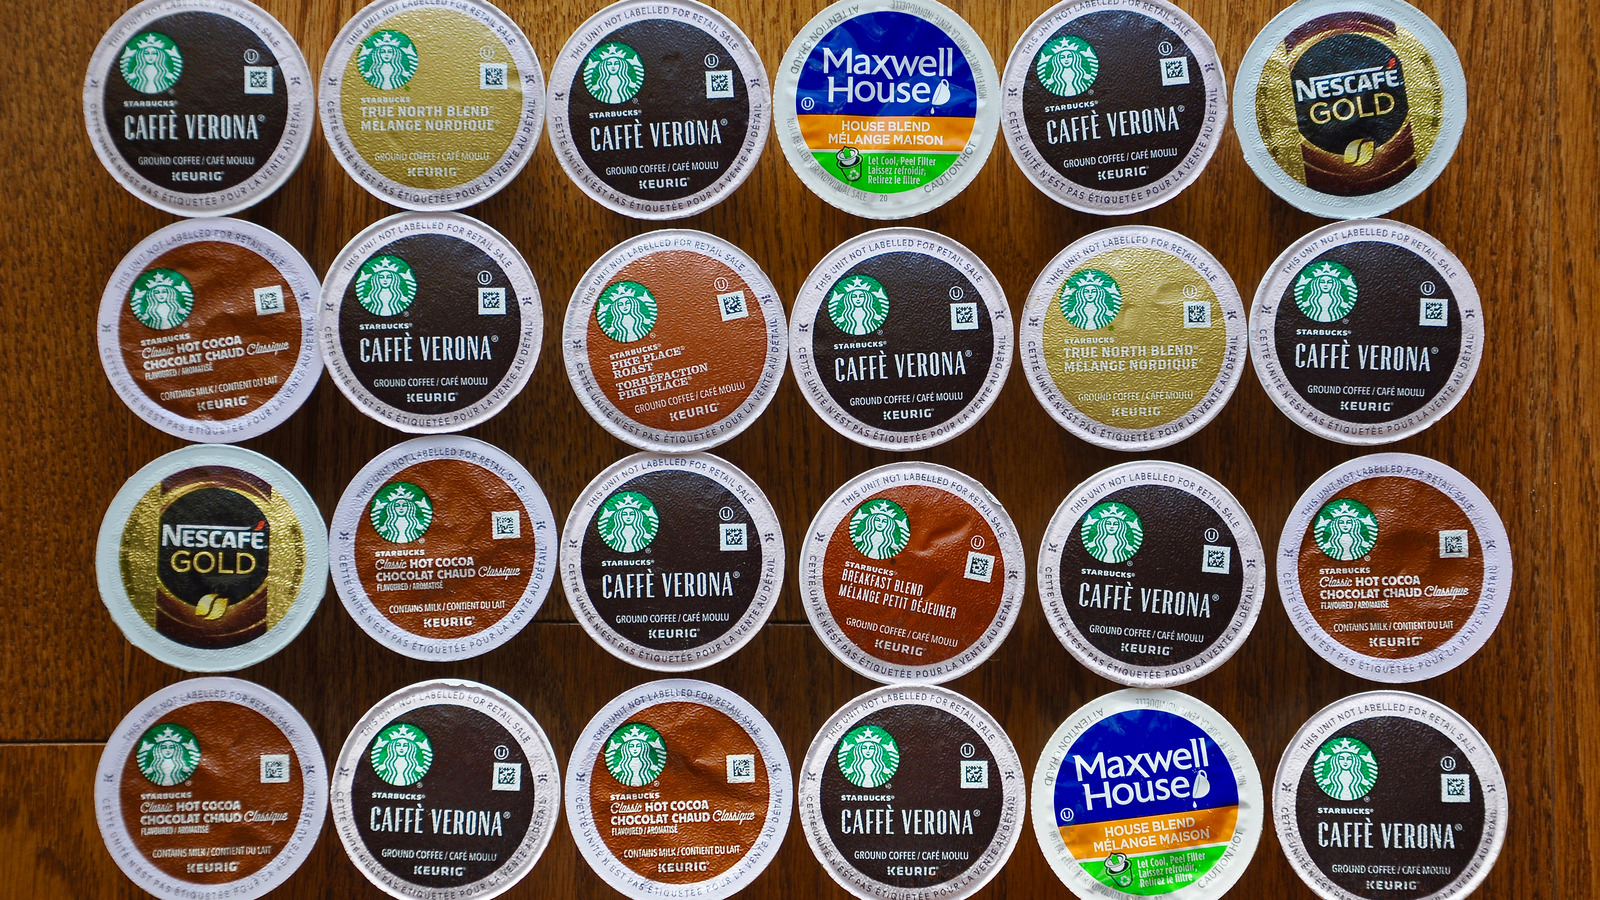 Why You Should Think Twice Before Throwing Away Old K-Cups